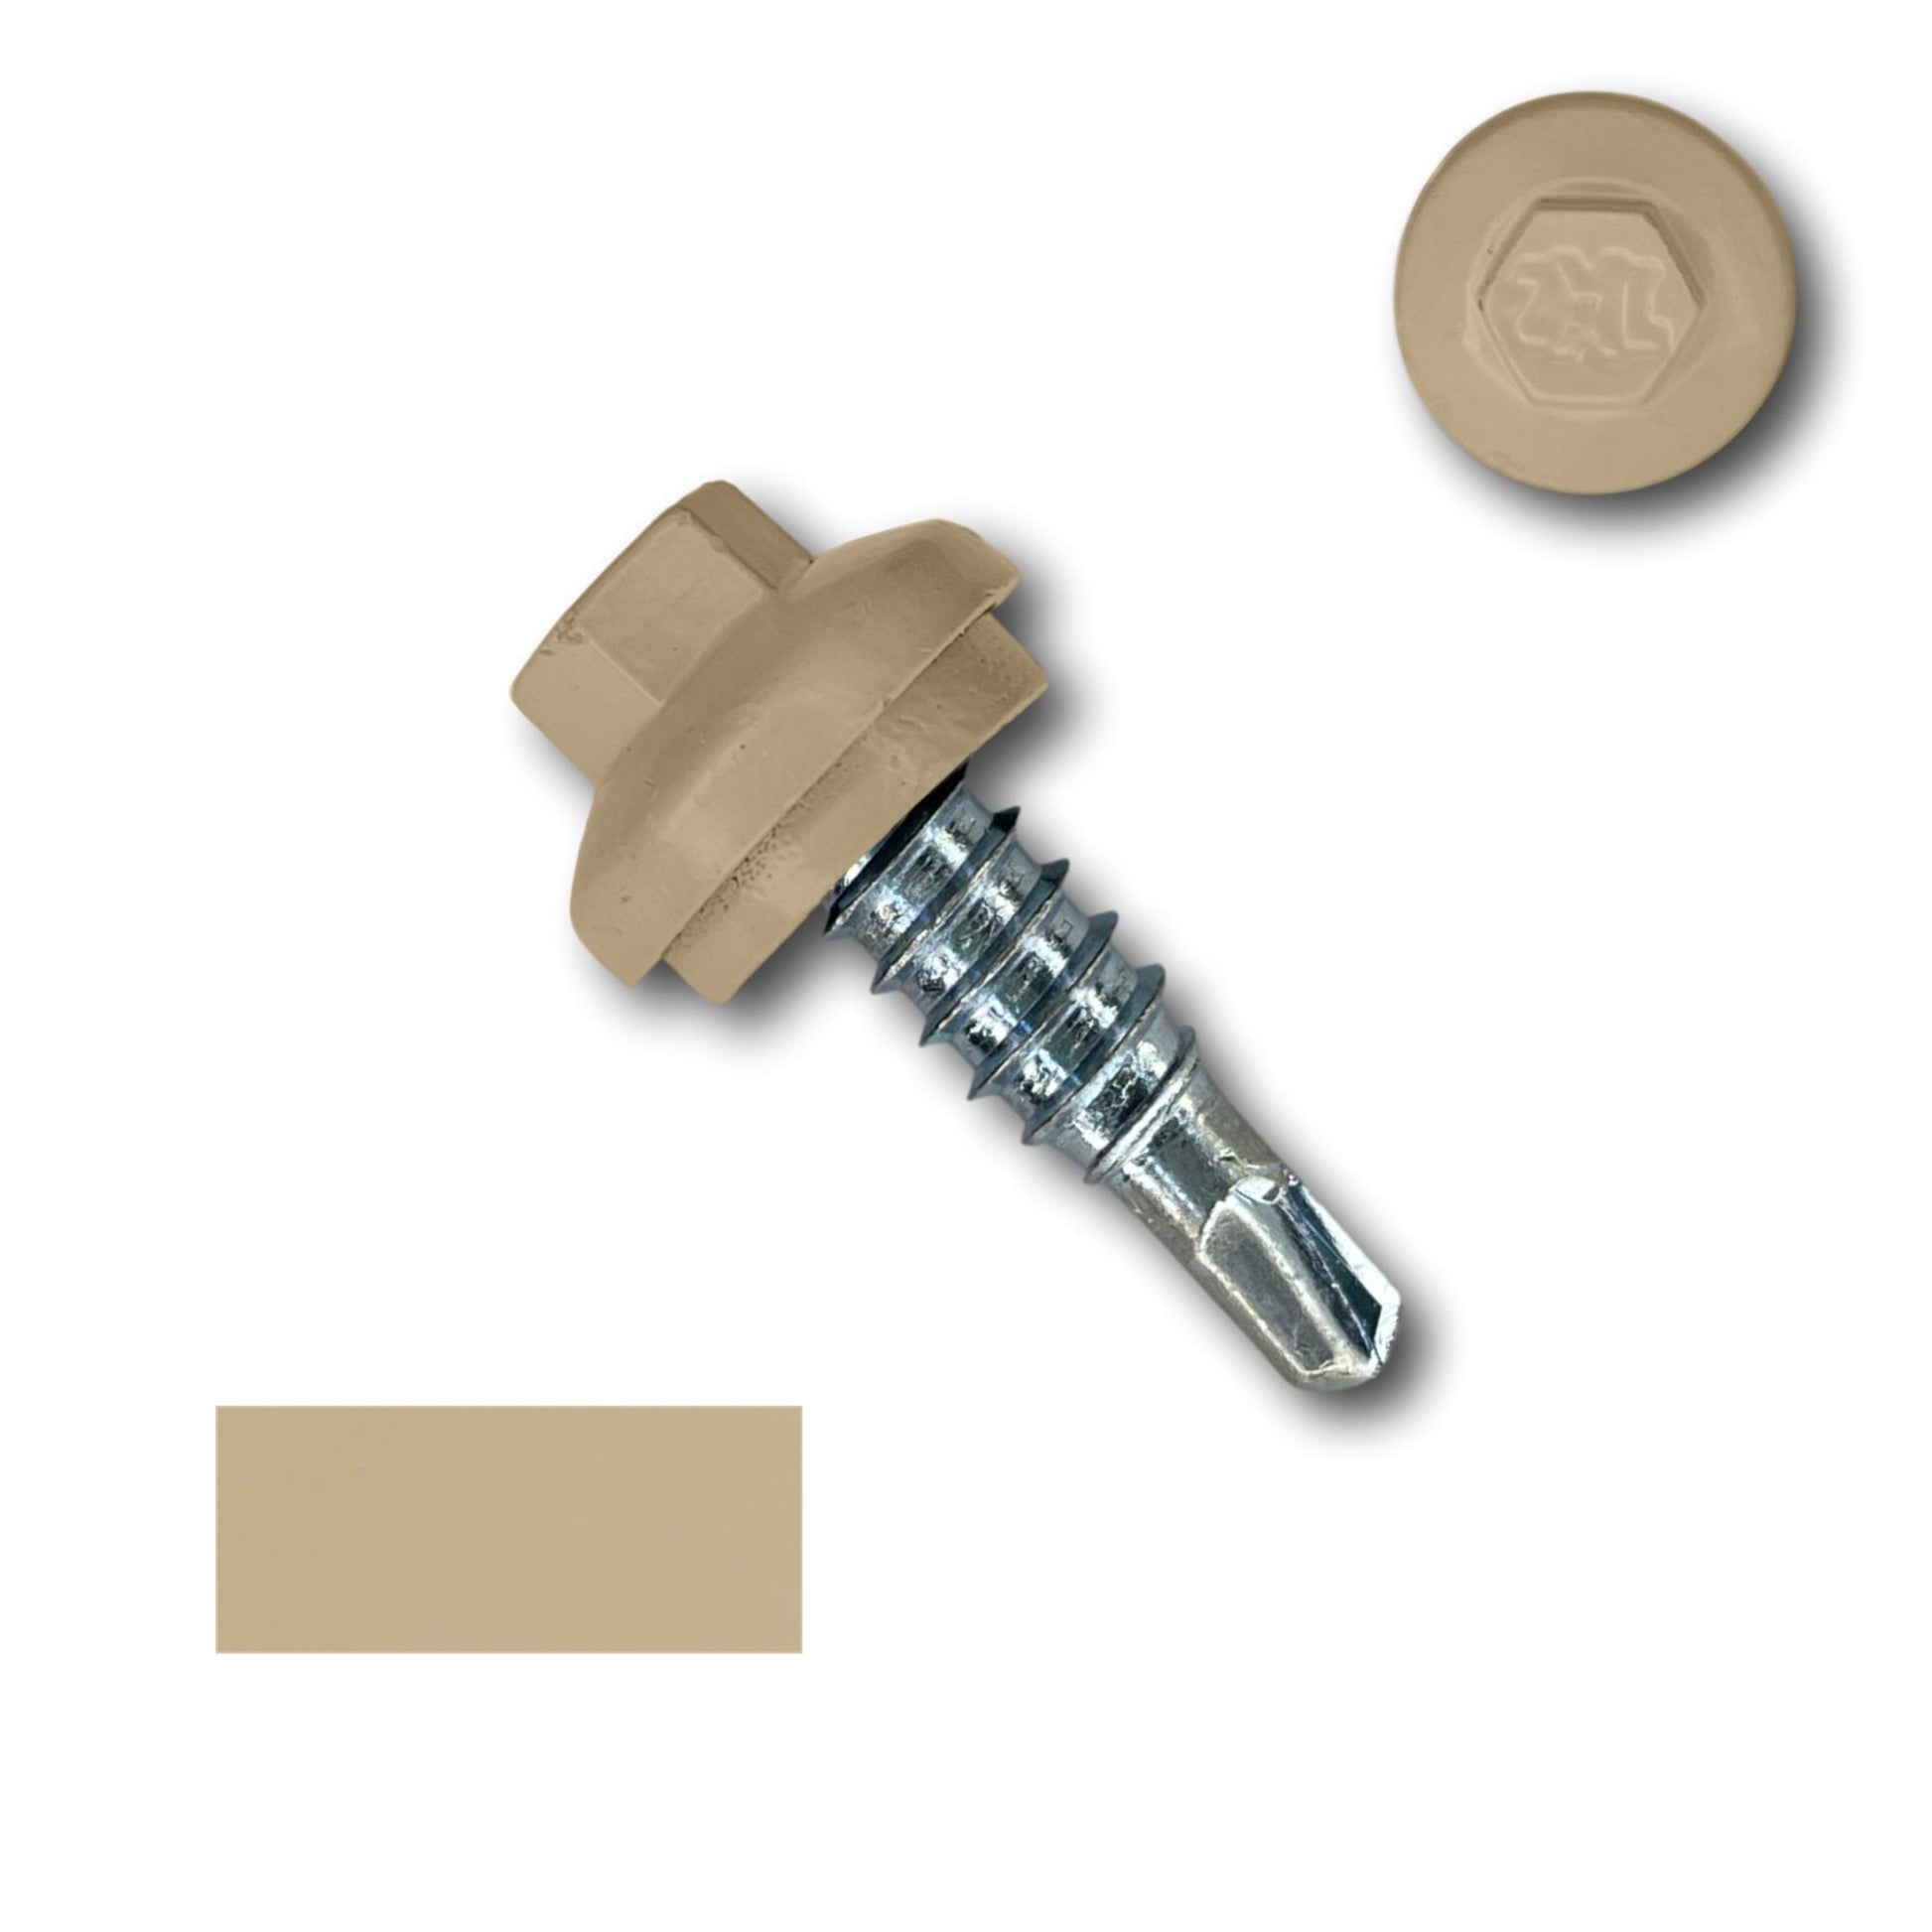 A beige hex washer head self-tapping screw with a sealing washer is shown. The image includes a close-up of the #14 x 7/8" Stitch Lap ZXL Dome Cap Metal Building Screws, Self-Drilling - 250 Pack and a rectangular swatch displaying the beige color. Designed for secure fastening, this partially threaded screw with a pointed end ensures efficient installation.